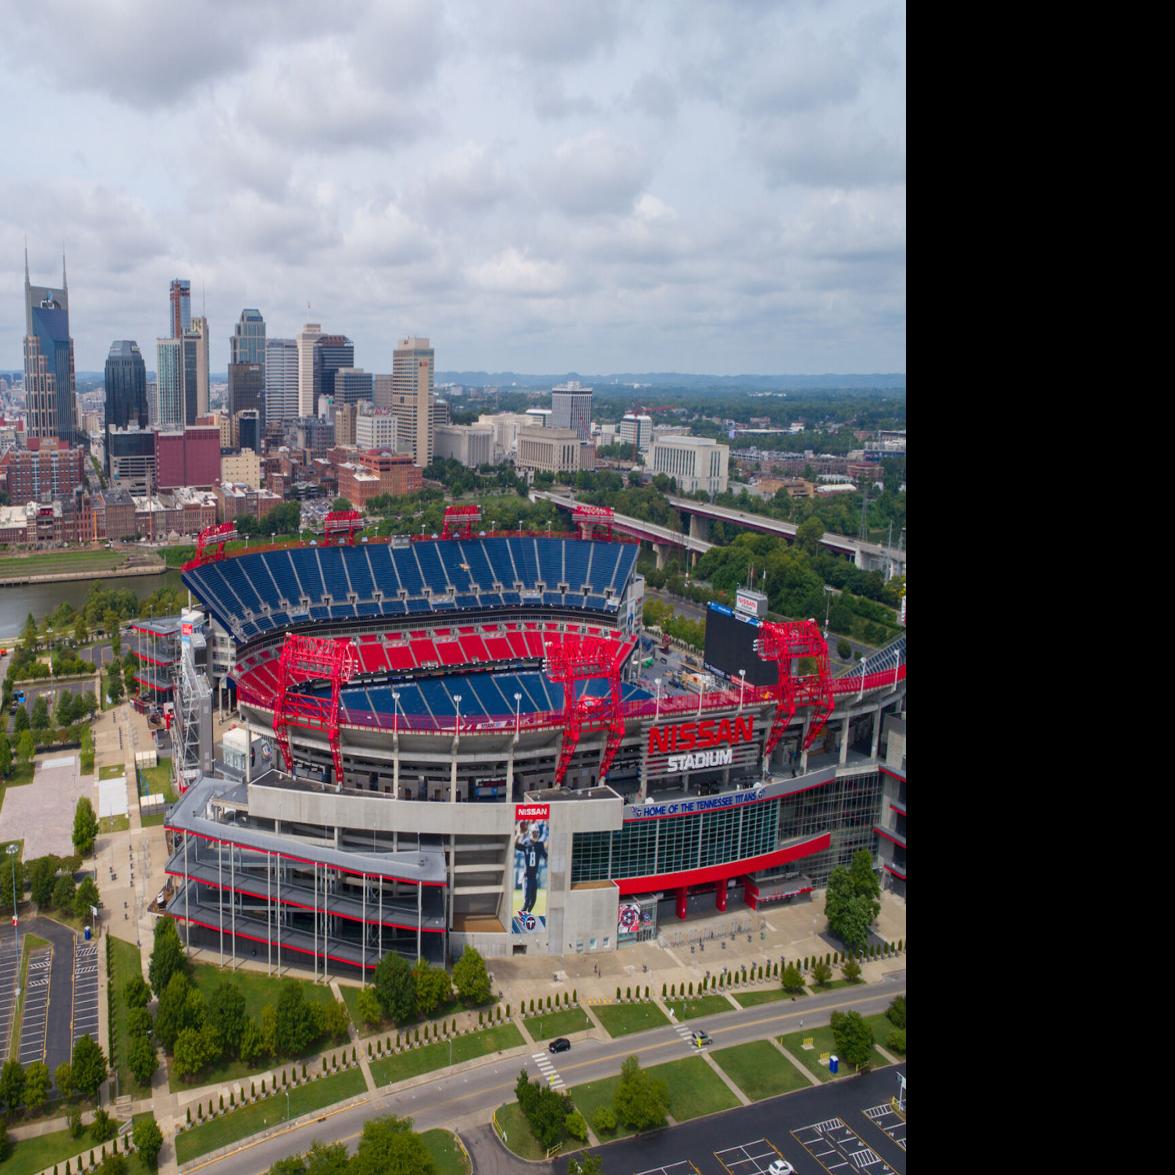 Large tax implications for a new Titans stadium in Nashville, Tennessee